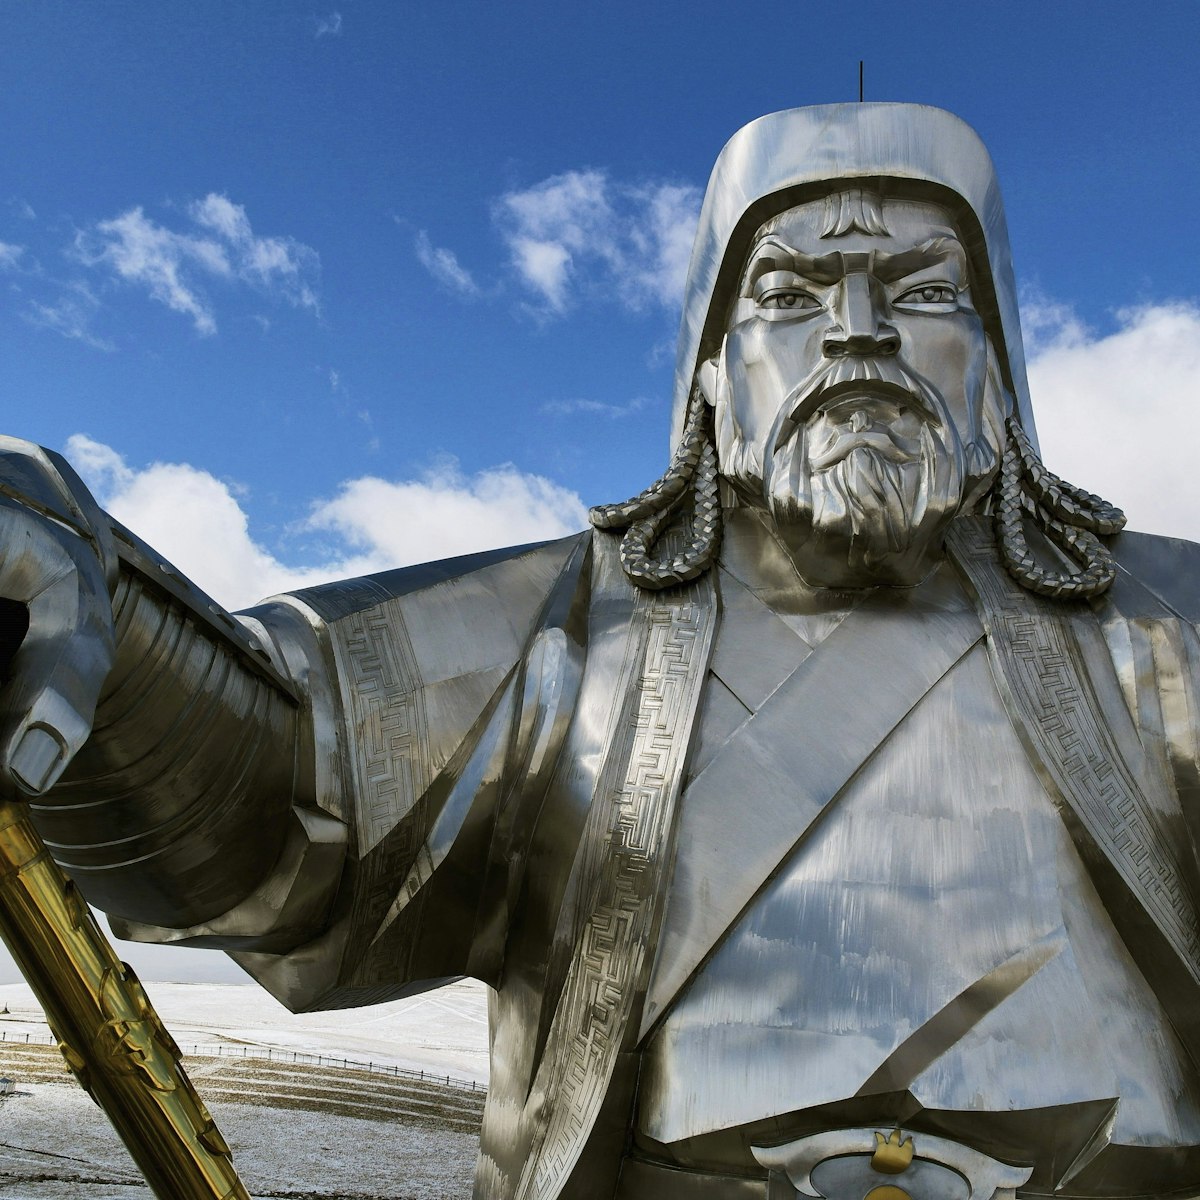 ULAN BATAAR, MONGOLIA - CIRCA SEPTEMBER, 2015: the biggest dschingis khan statue in the world near ulan bataar.; Shutterstock ID 355957883; Your name (First / Last): Megan Eaves; GL account no.: 65050; Netsuite department name: Online Editorial; Full Product or Project name including edition: Mongolia destination page highlights - Best in Travel 2017